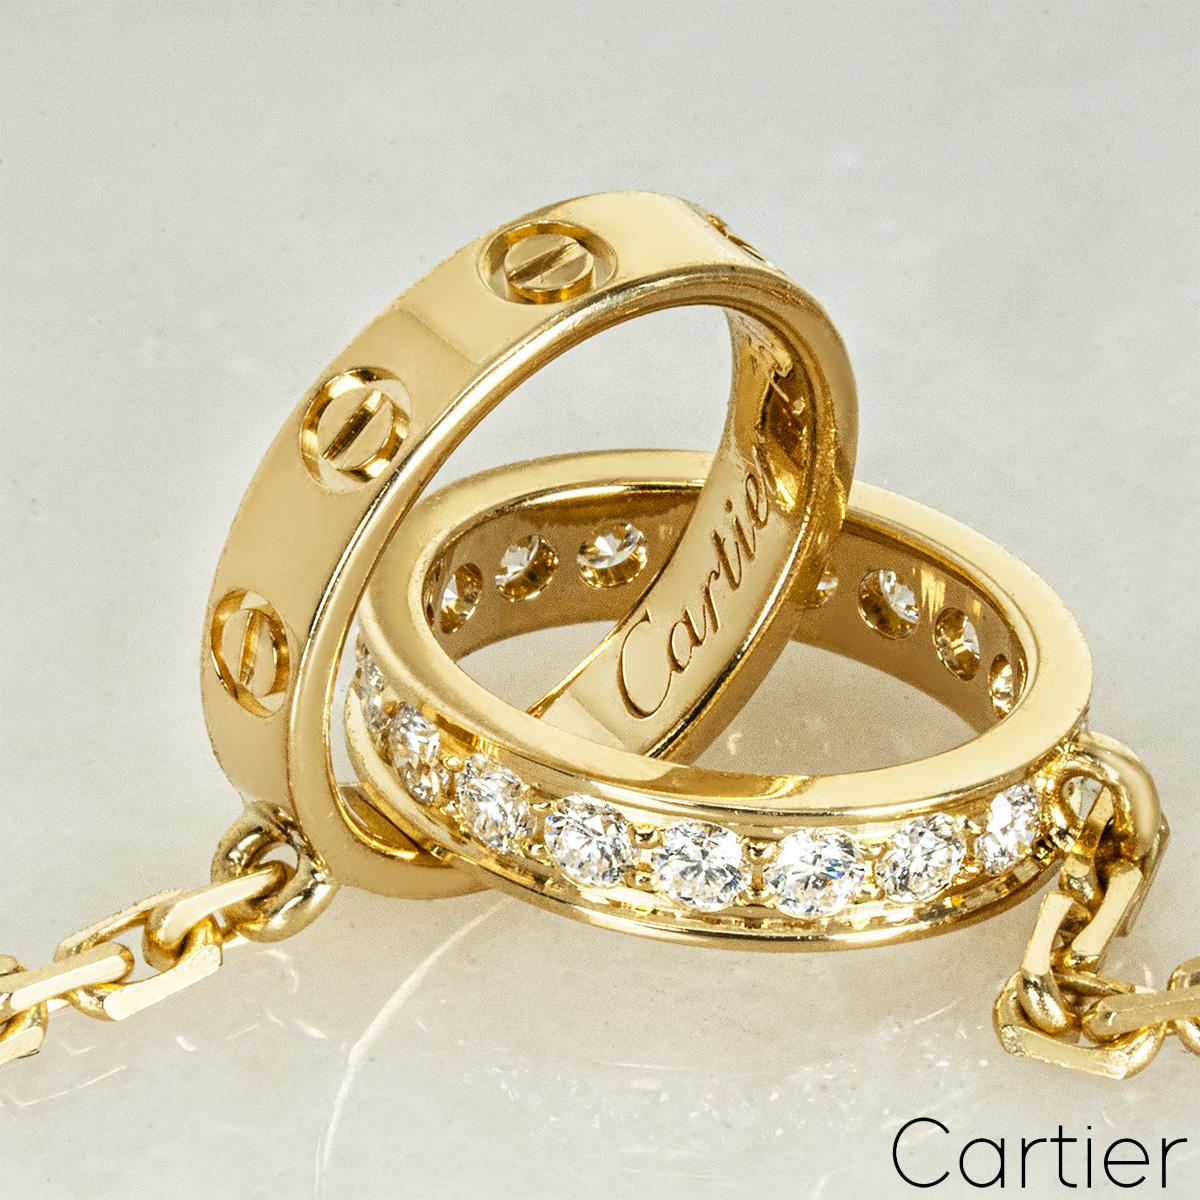 Cartier 18k Yellow Gold Diamond Love Necklace B7013800 For Sale 2